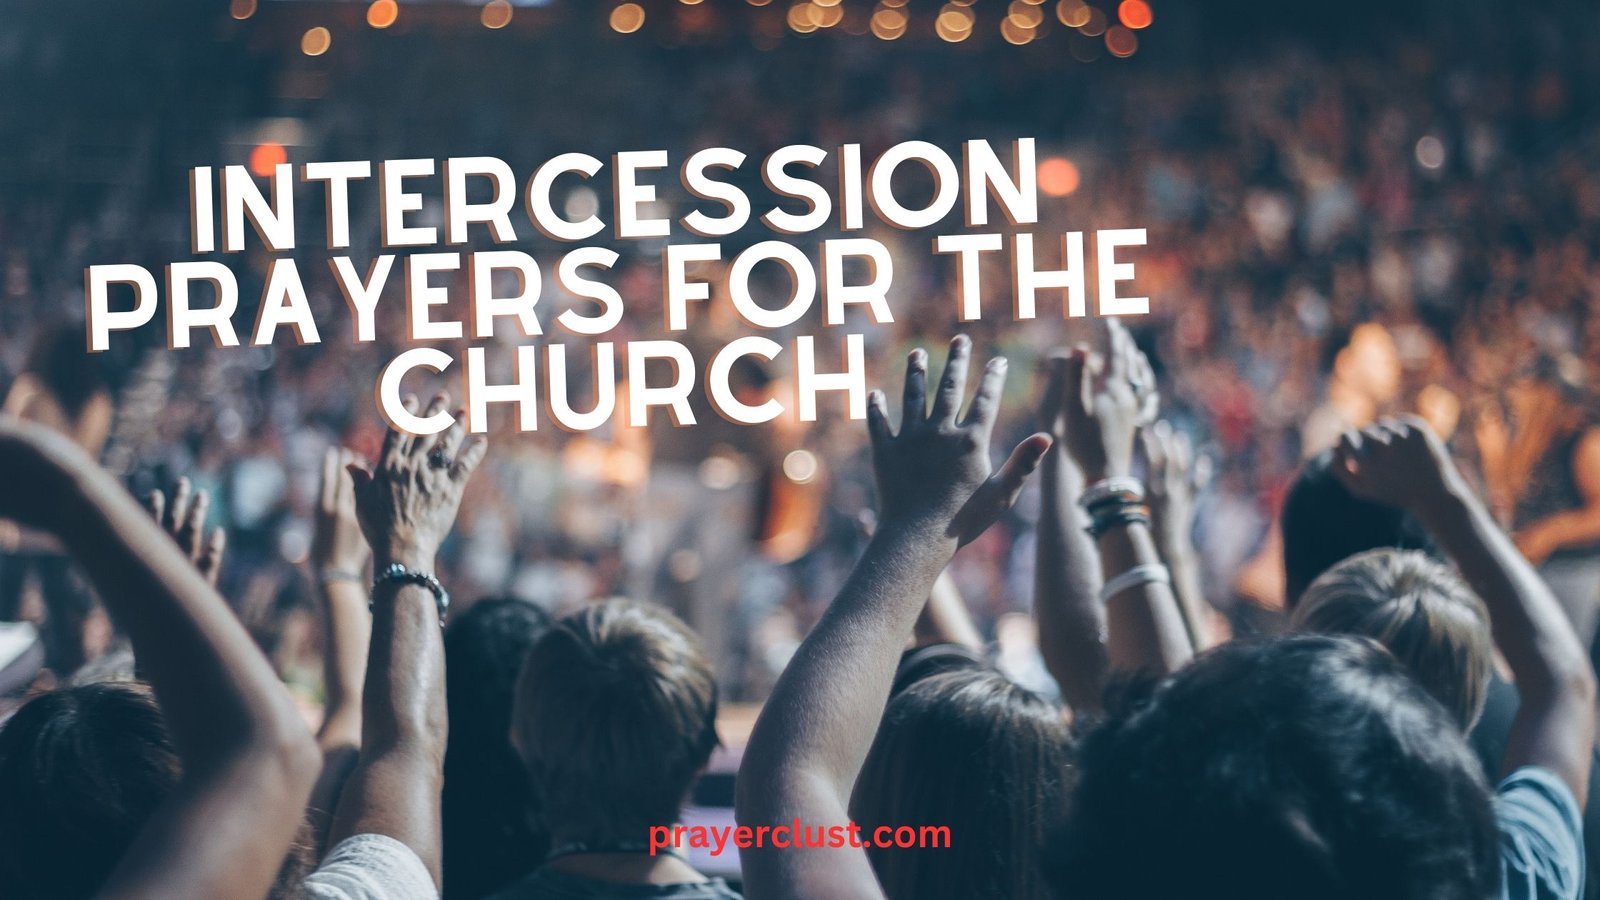 Intercession Prayers for the Church